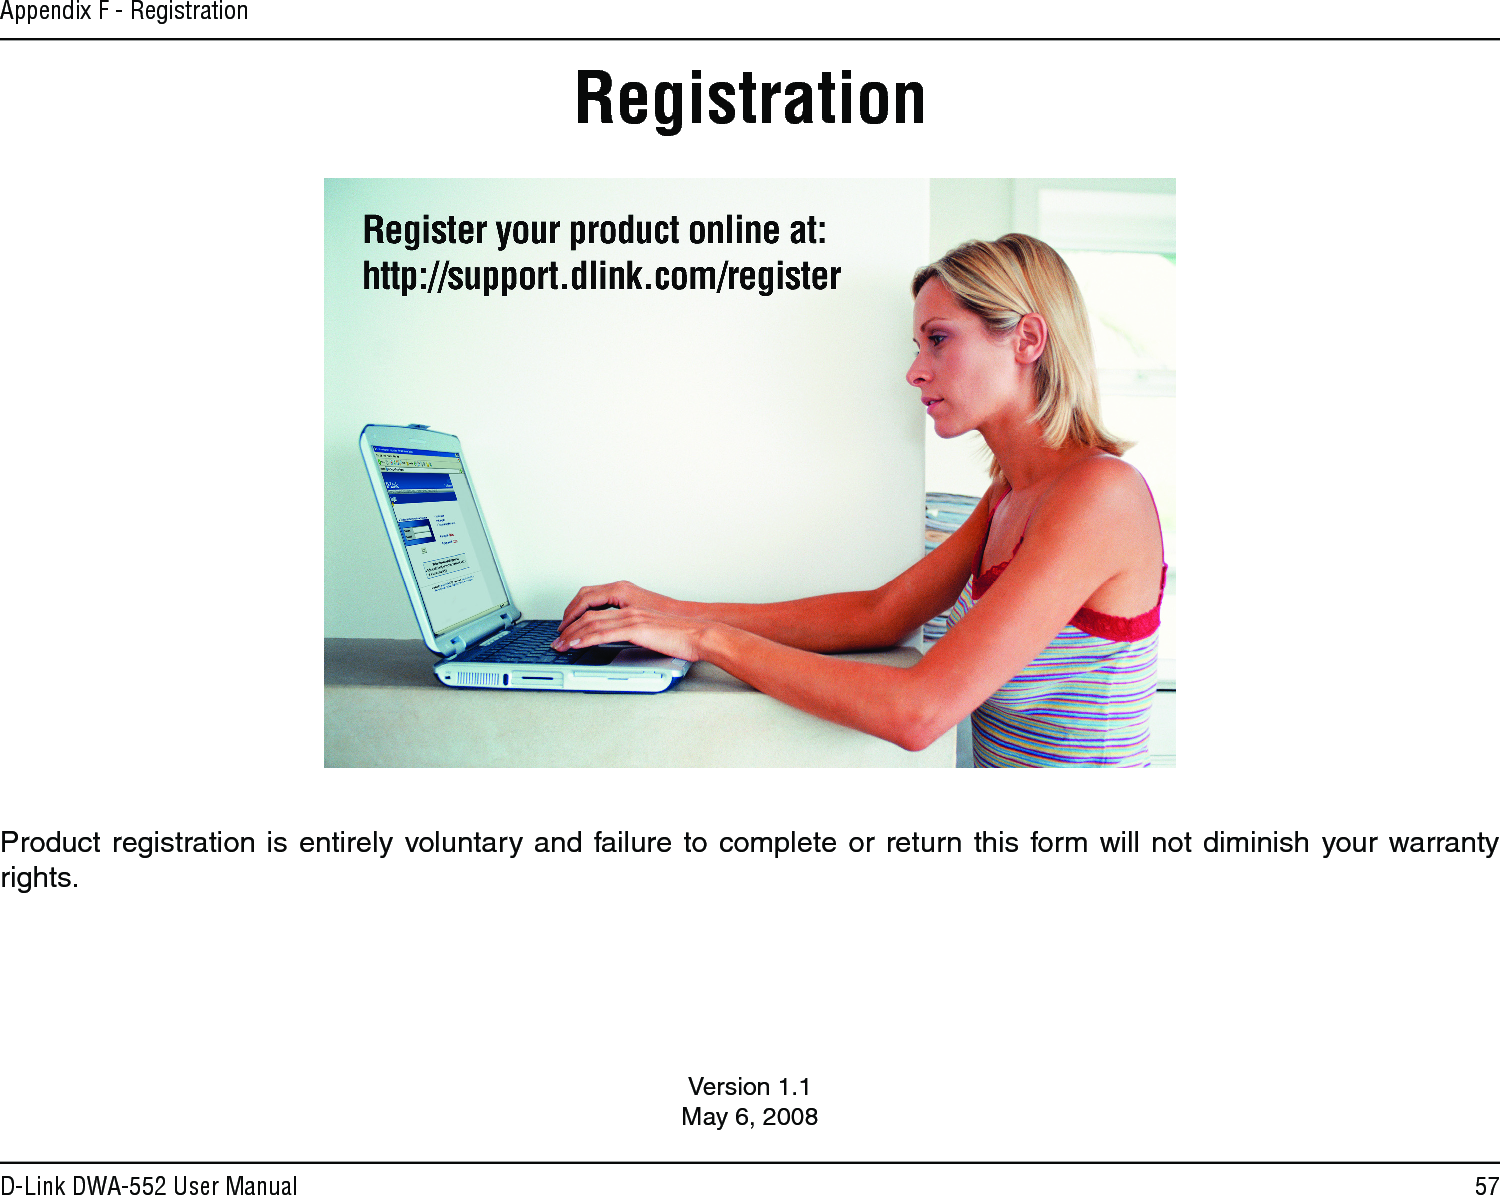 57D-Link DWA-552 User ManualAppendix F - RegistrationVersion 1.1May 6, 2008Product registration is entirely voluntary and failure to complete or return this  form will not diminish your warranty rights.Registration